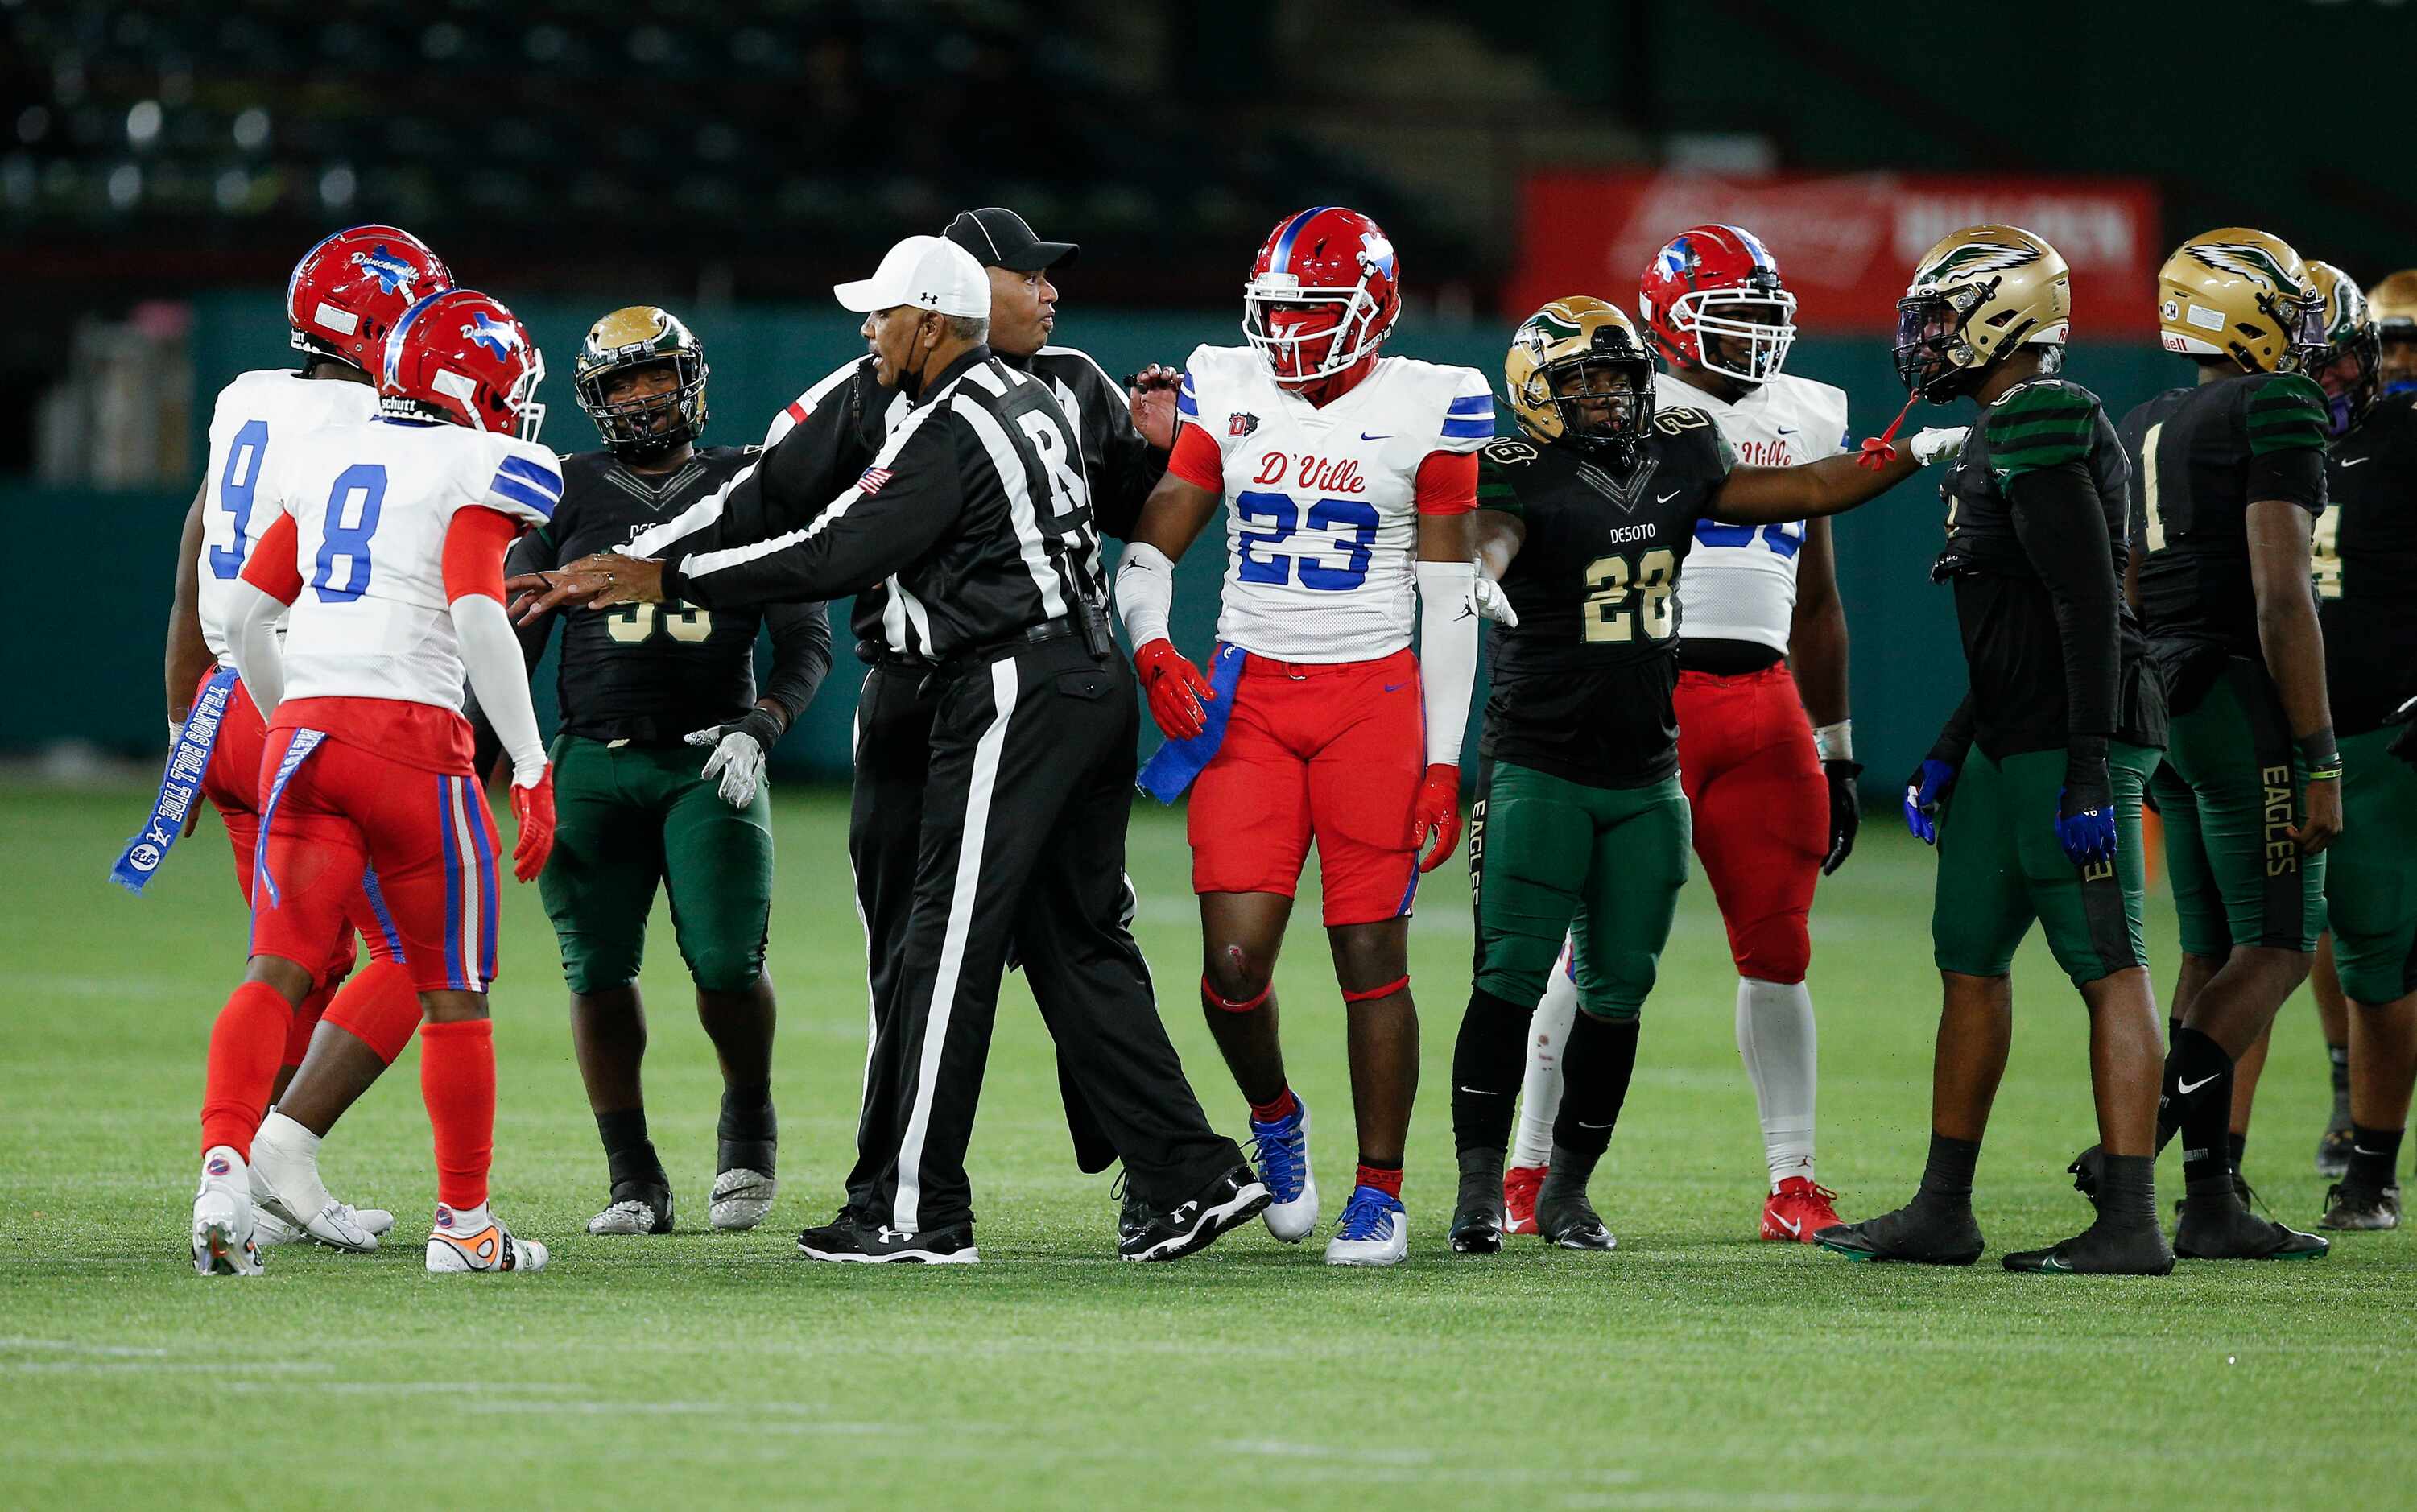 Referees separate Duncanville and DeSoto players after a skirmish between plays during the...